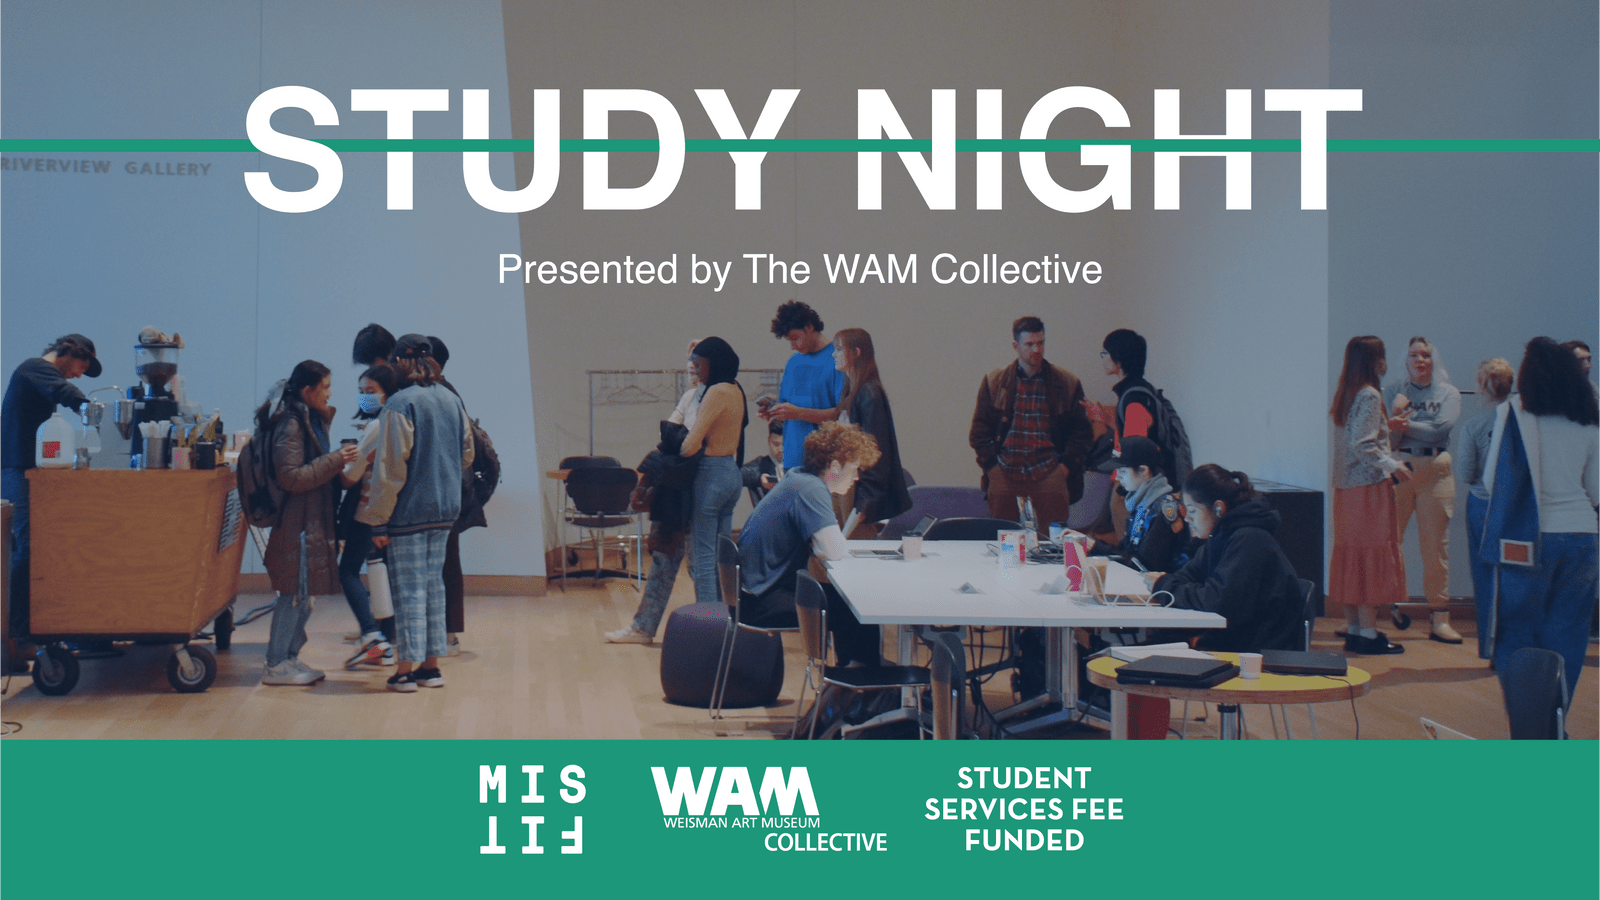 students studying with text "STUDY NIGHT Presented by WAM Collective"